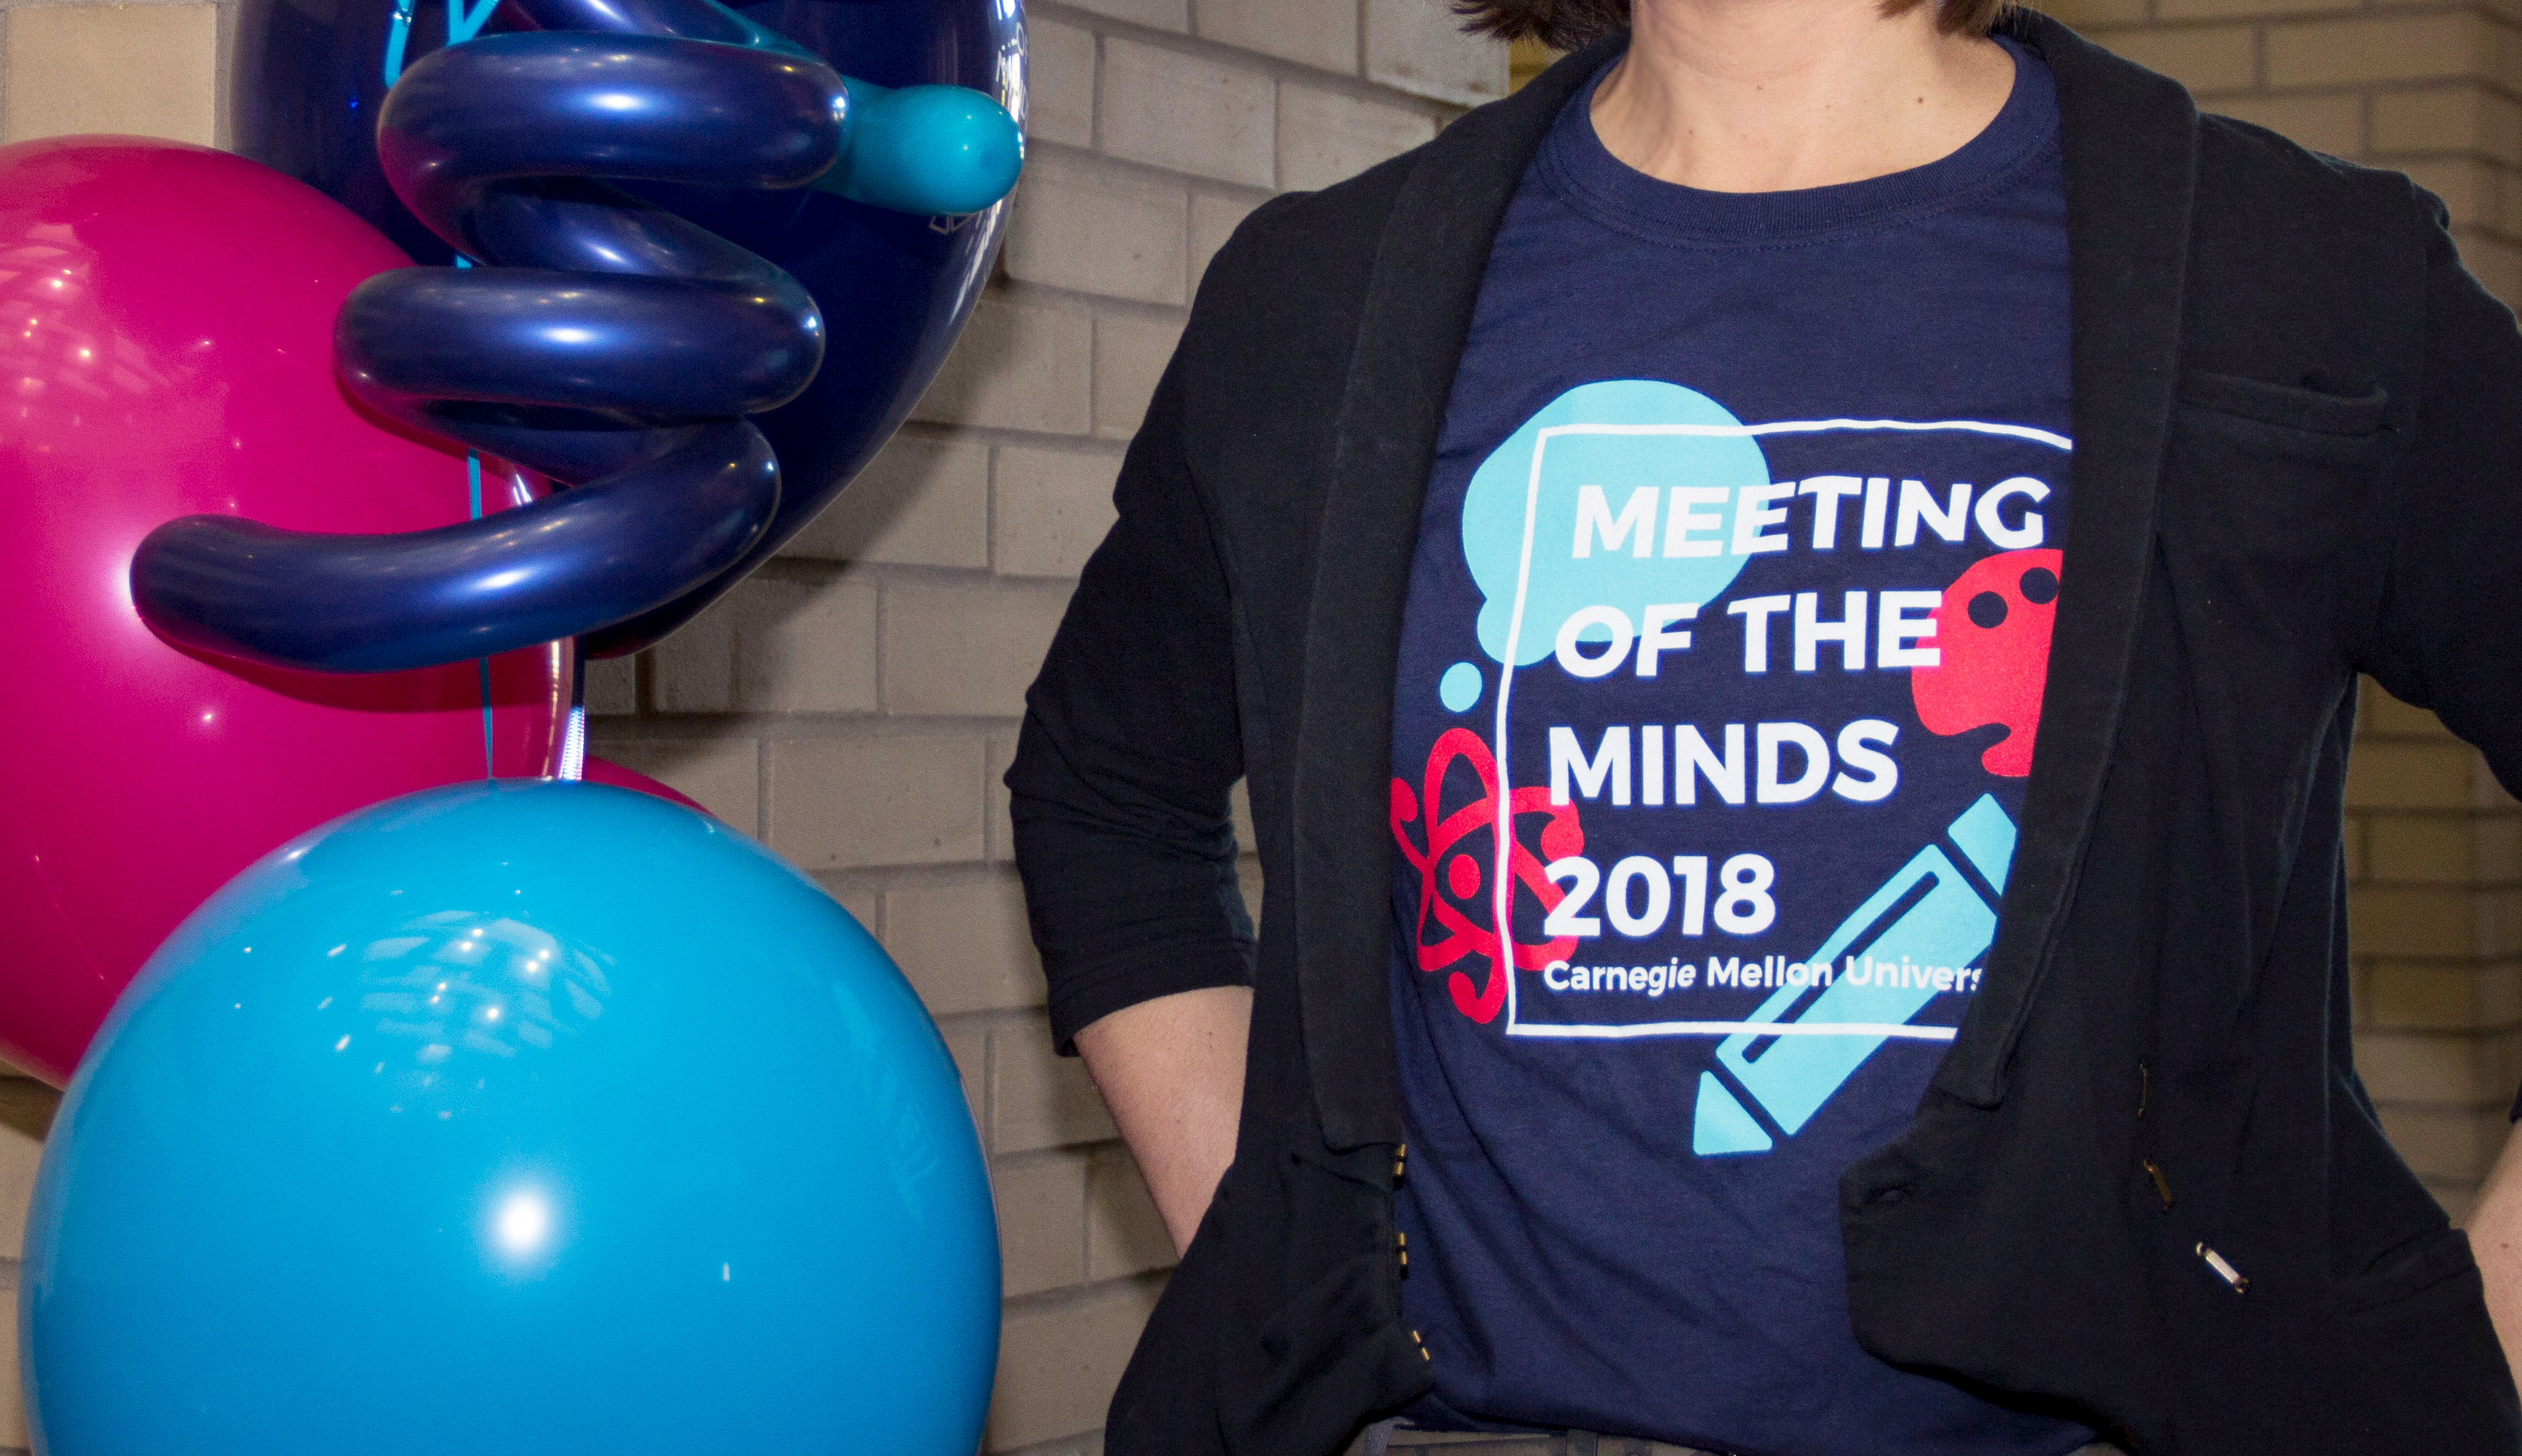 Meeting of the Minds 2018